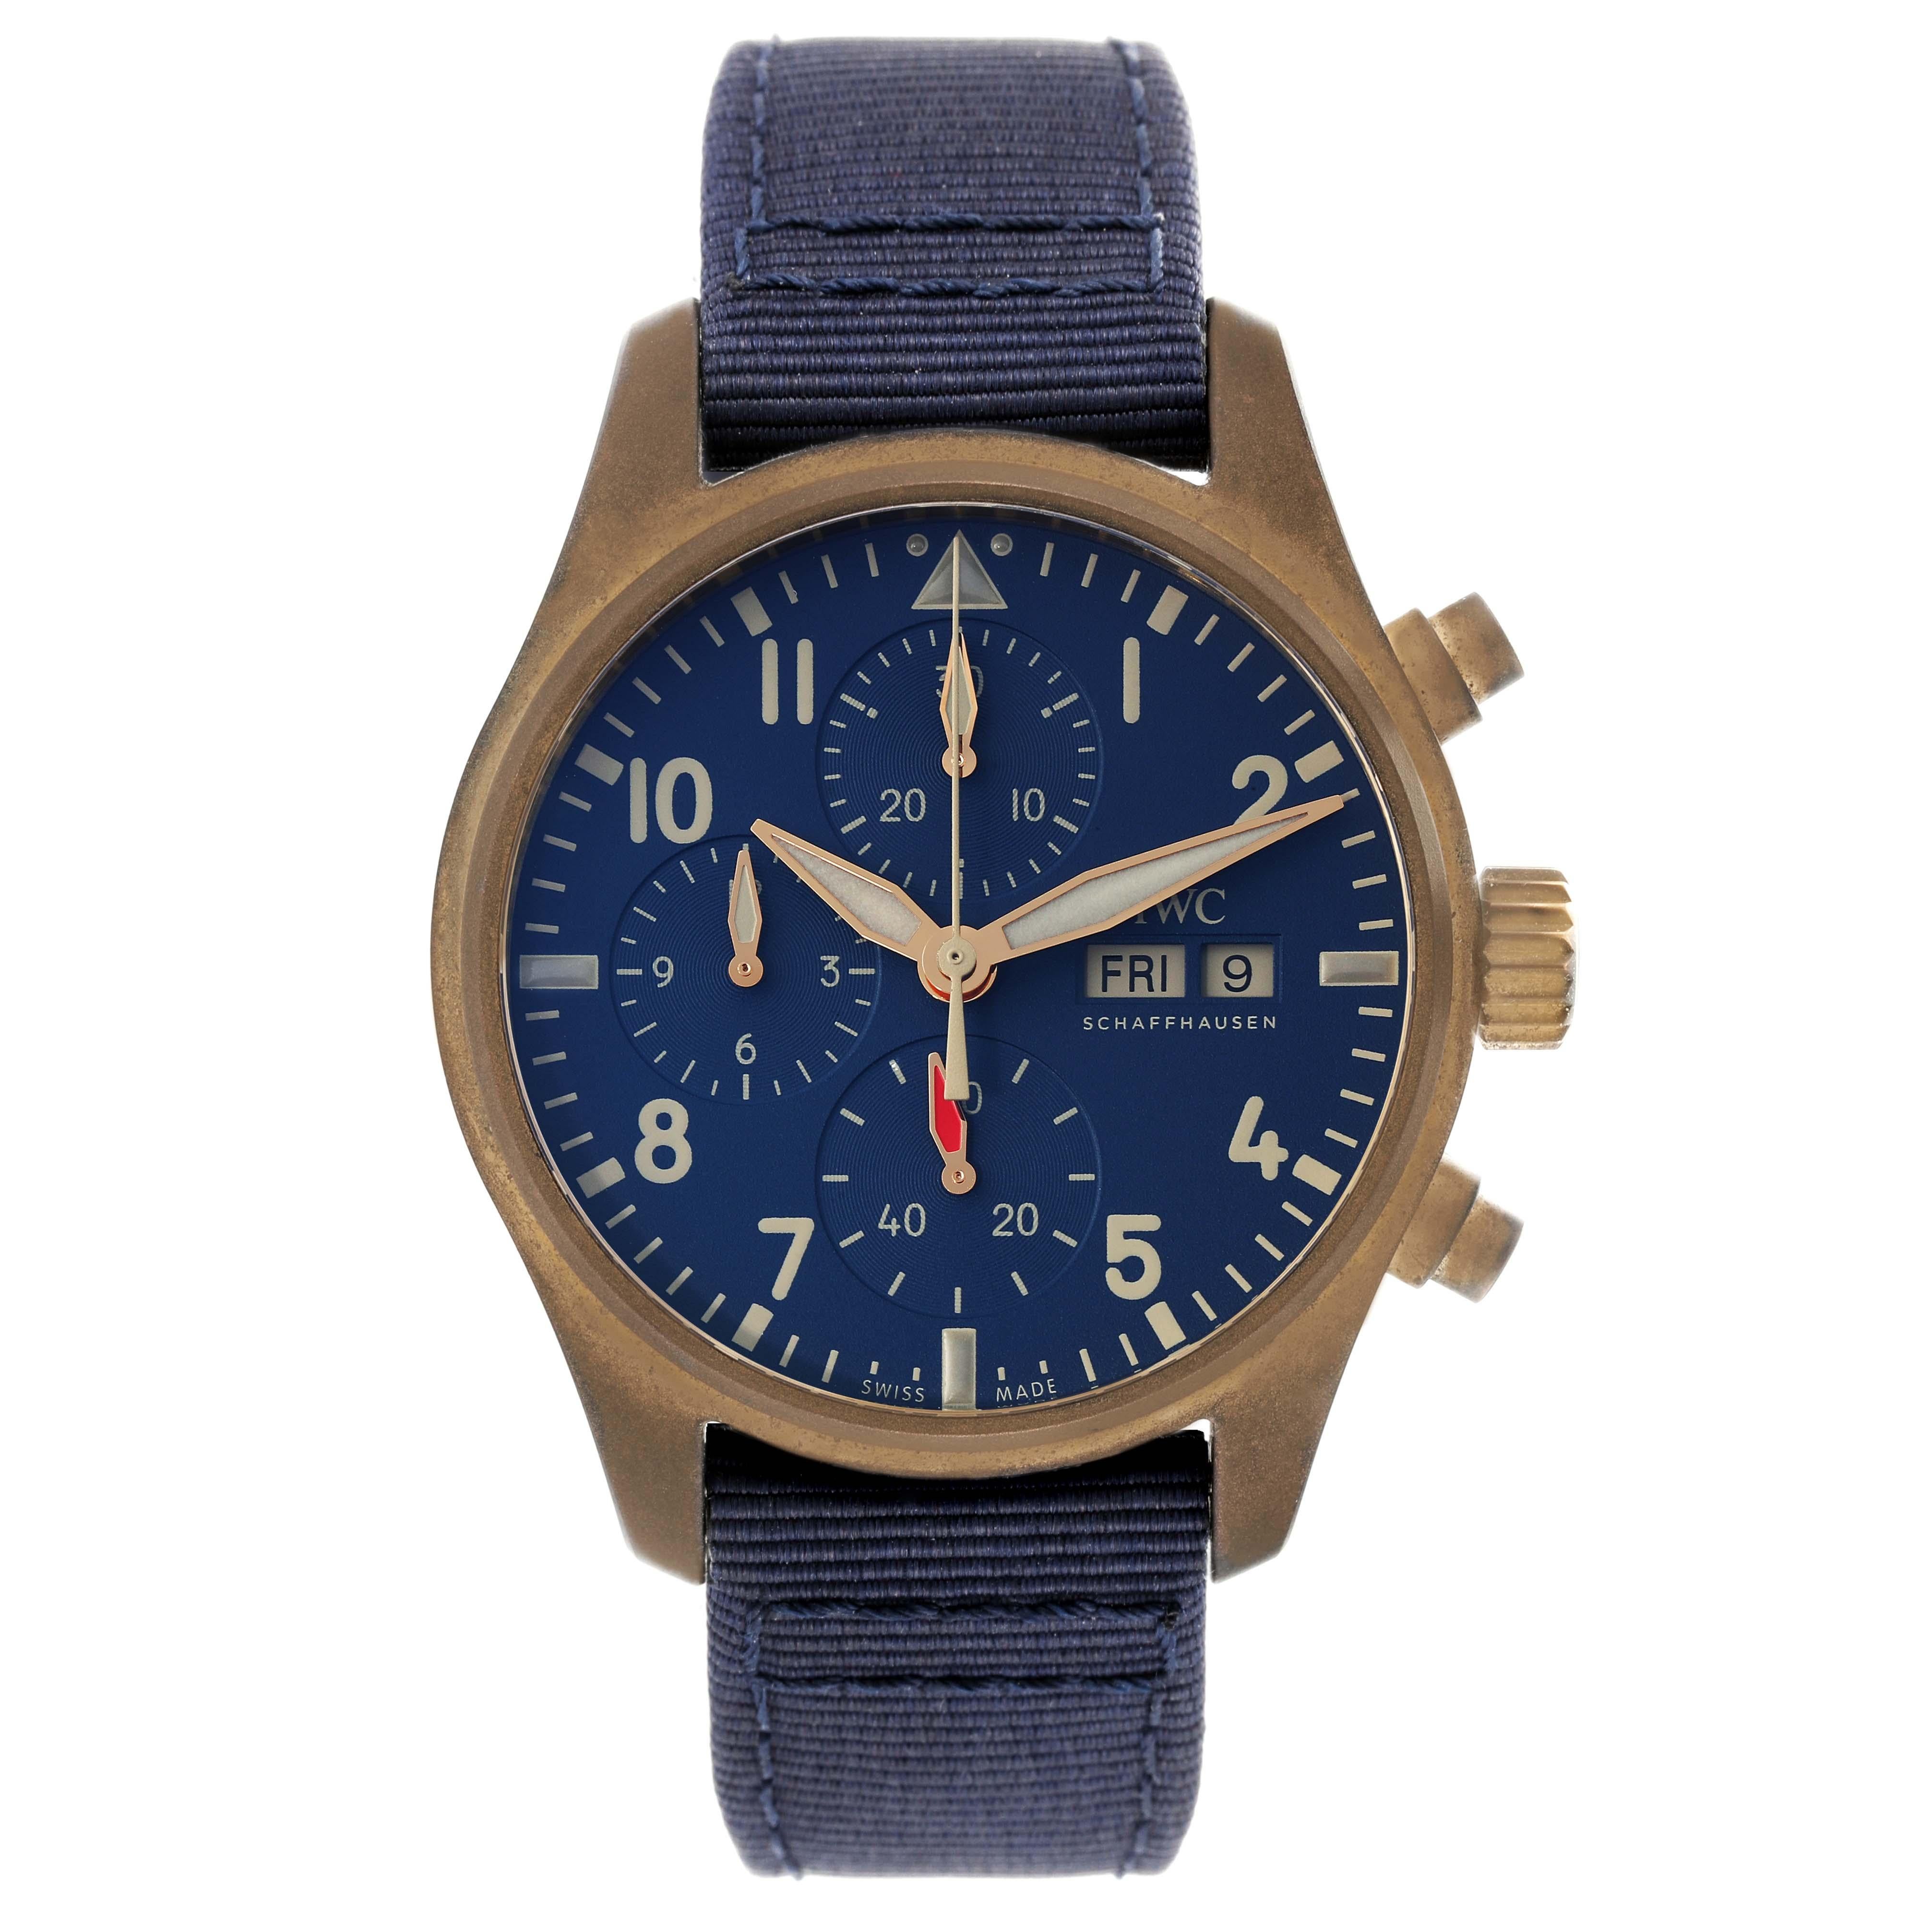 IWC Pilot Chronograph Blue Dial Mens Watch IW388109 Box Card. Automatic self-winding chronograph movement. Bronze case 41 mm in diameter. Screw in crown. Exhibition transparent sapphire crystal caseback. . Scratch resistant sapphire crystal. Blue